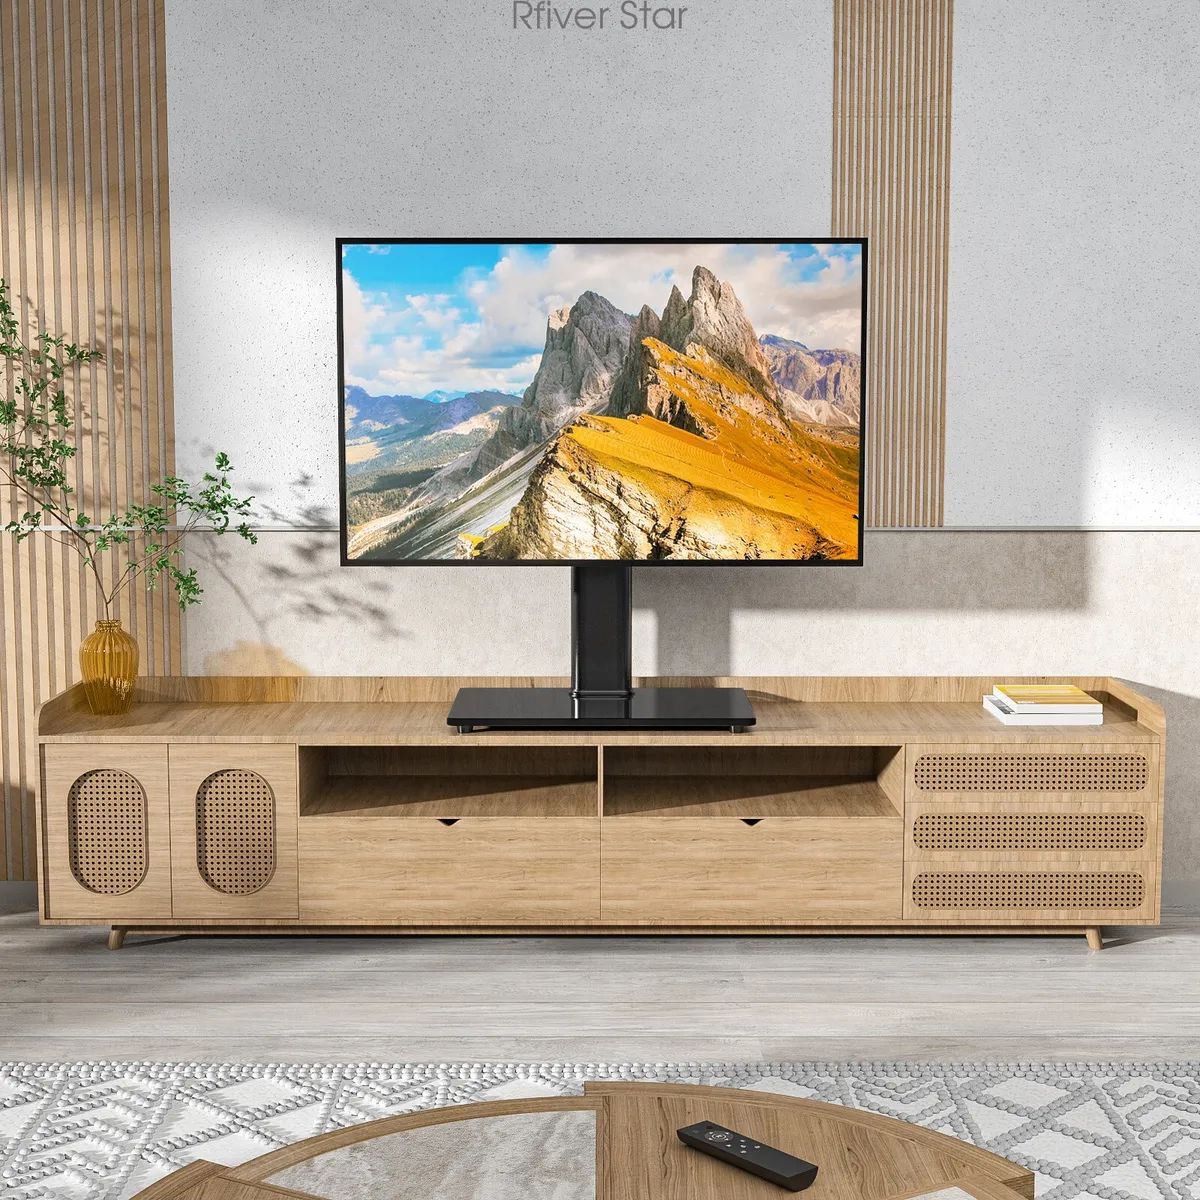 Universal Swivel Tabletop Tv Stand For Flat Screens 23 24 26 32 39 40 43  Inch Tv | Ebay Throughout Universal Tabletop Tv Stands (View 2 of 15)